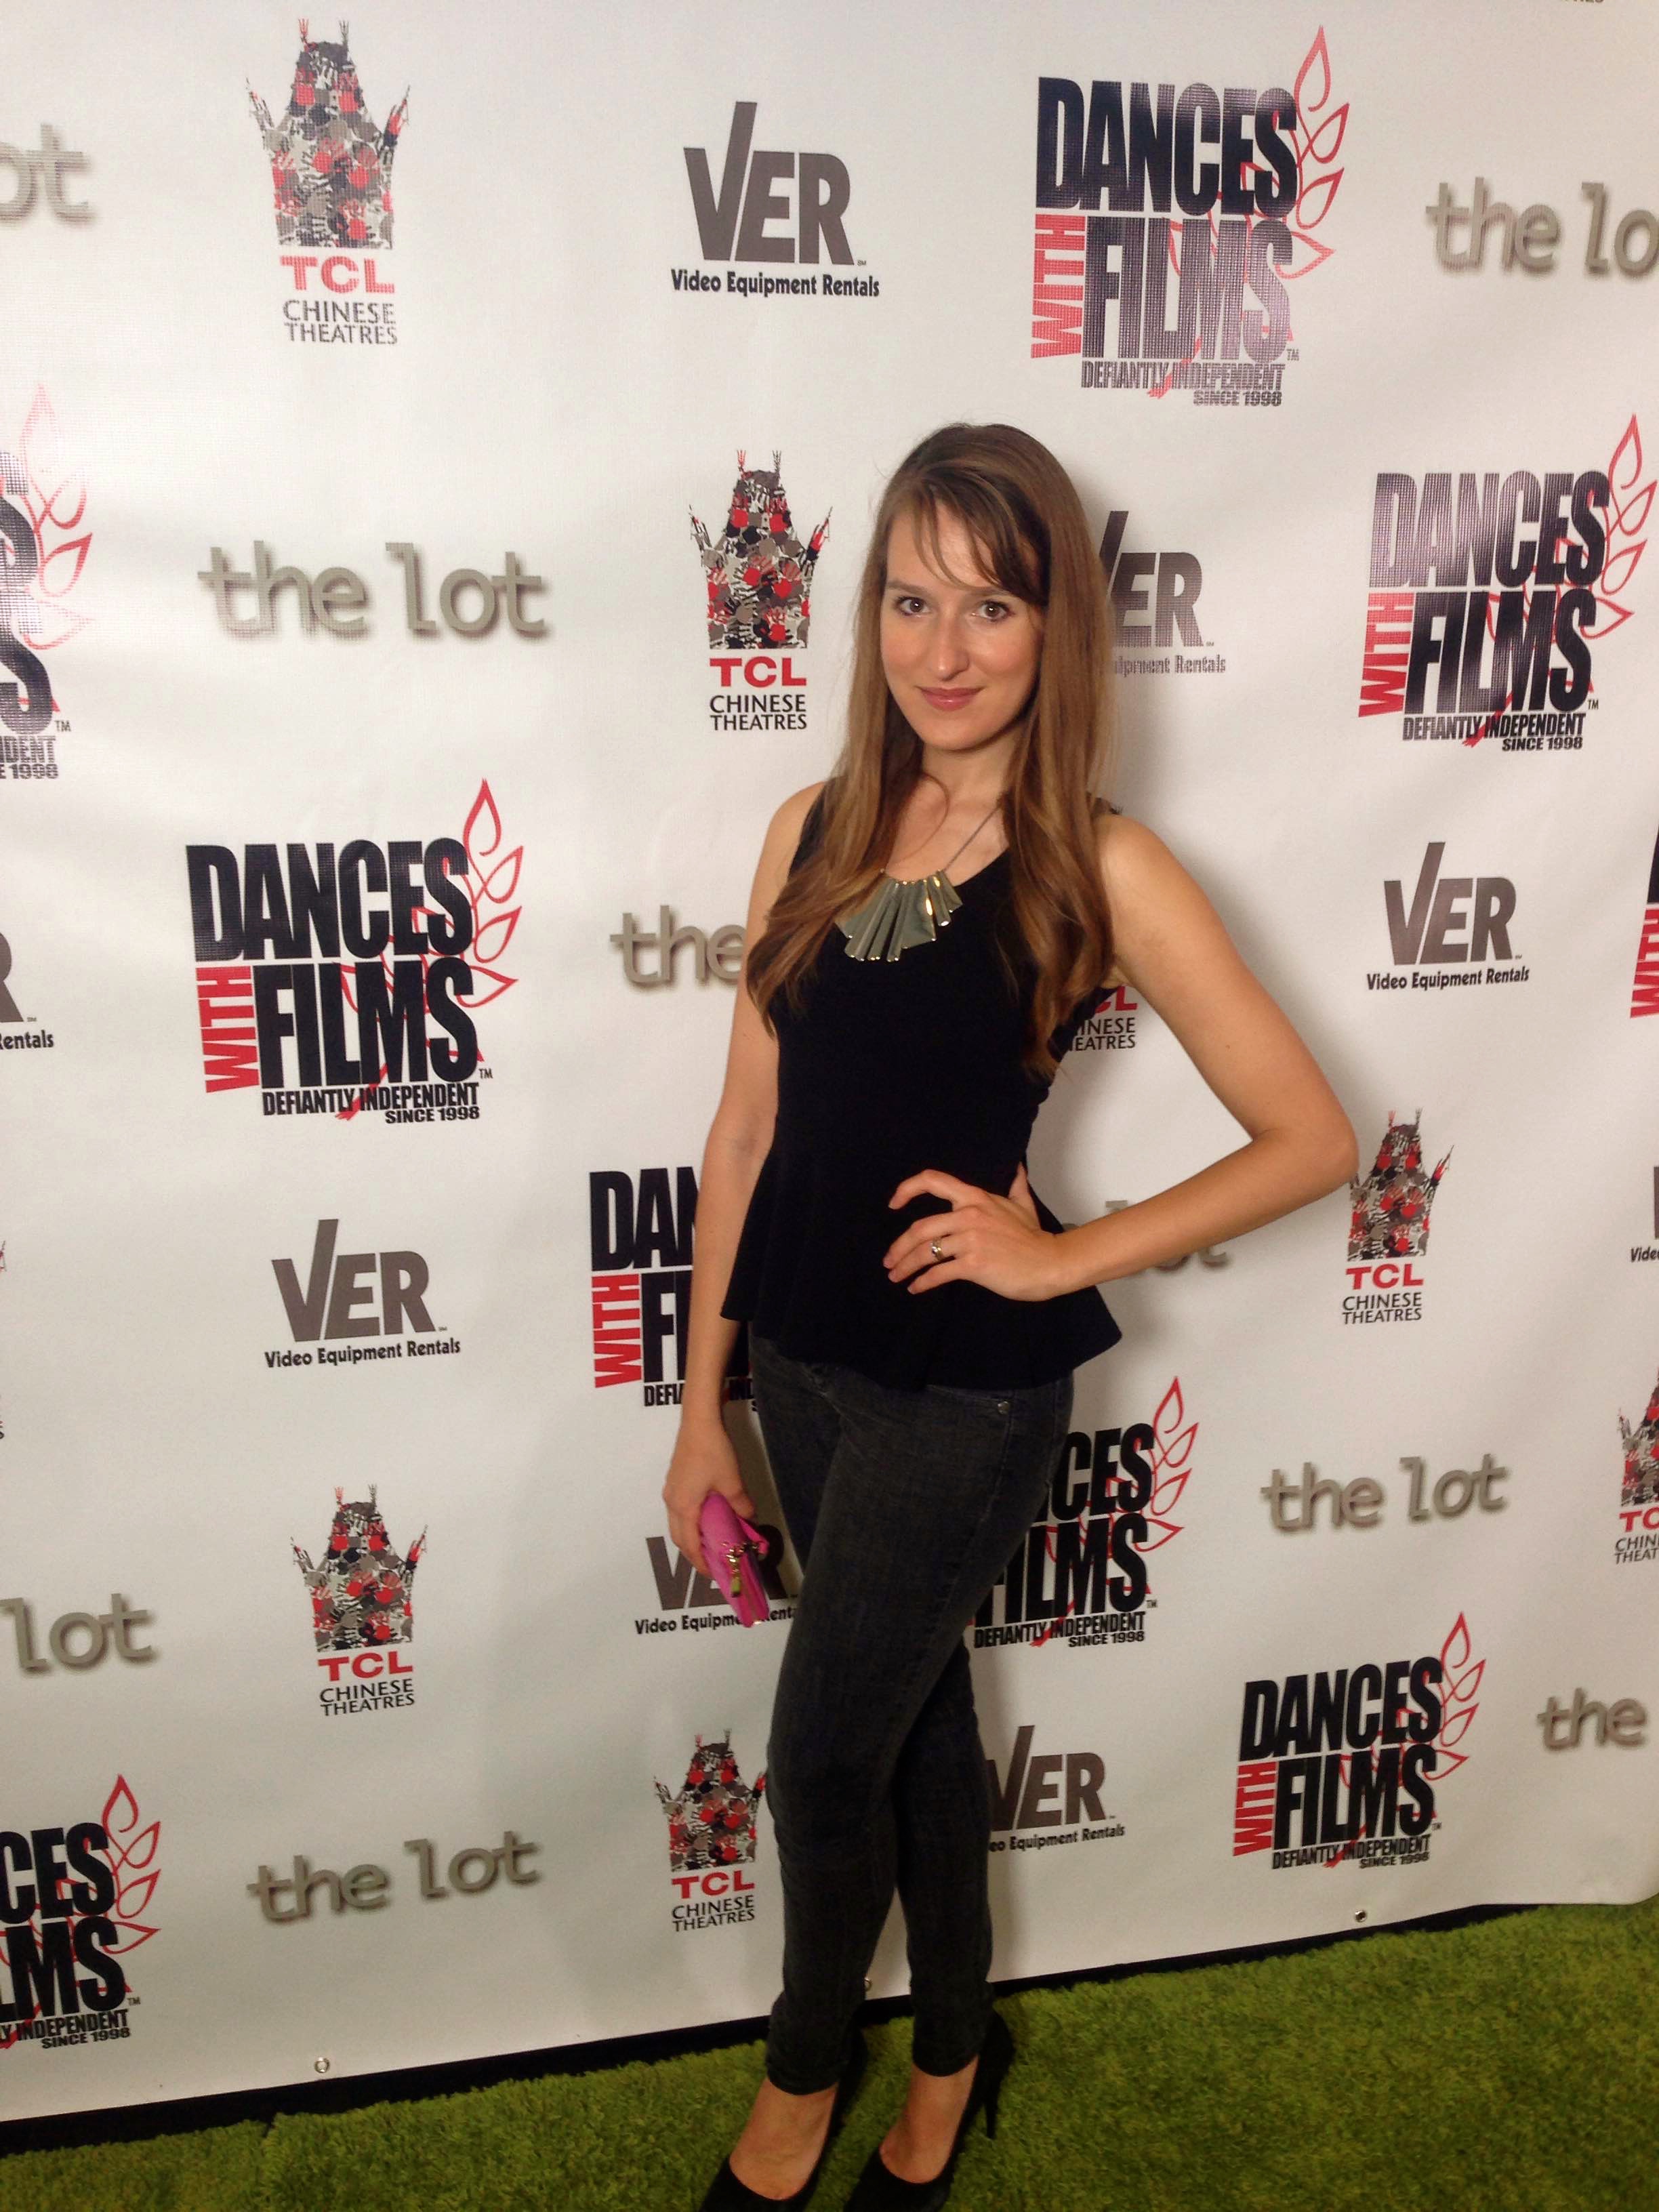 Sarah J. Eagen at the Dances With Films 18 opening party in Hollywood on May 28, 2015